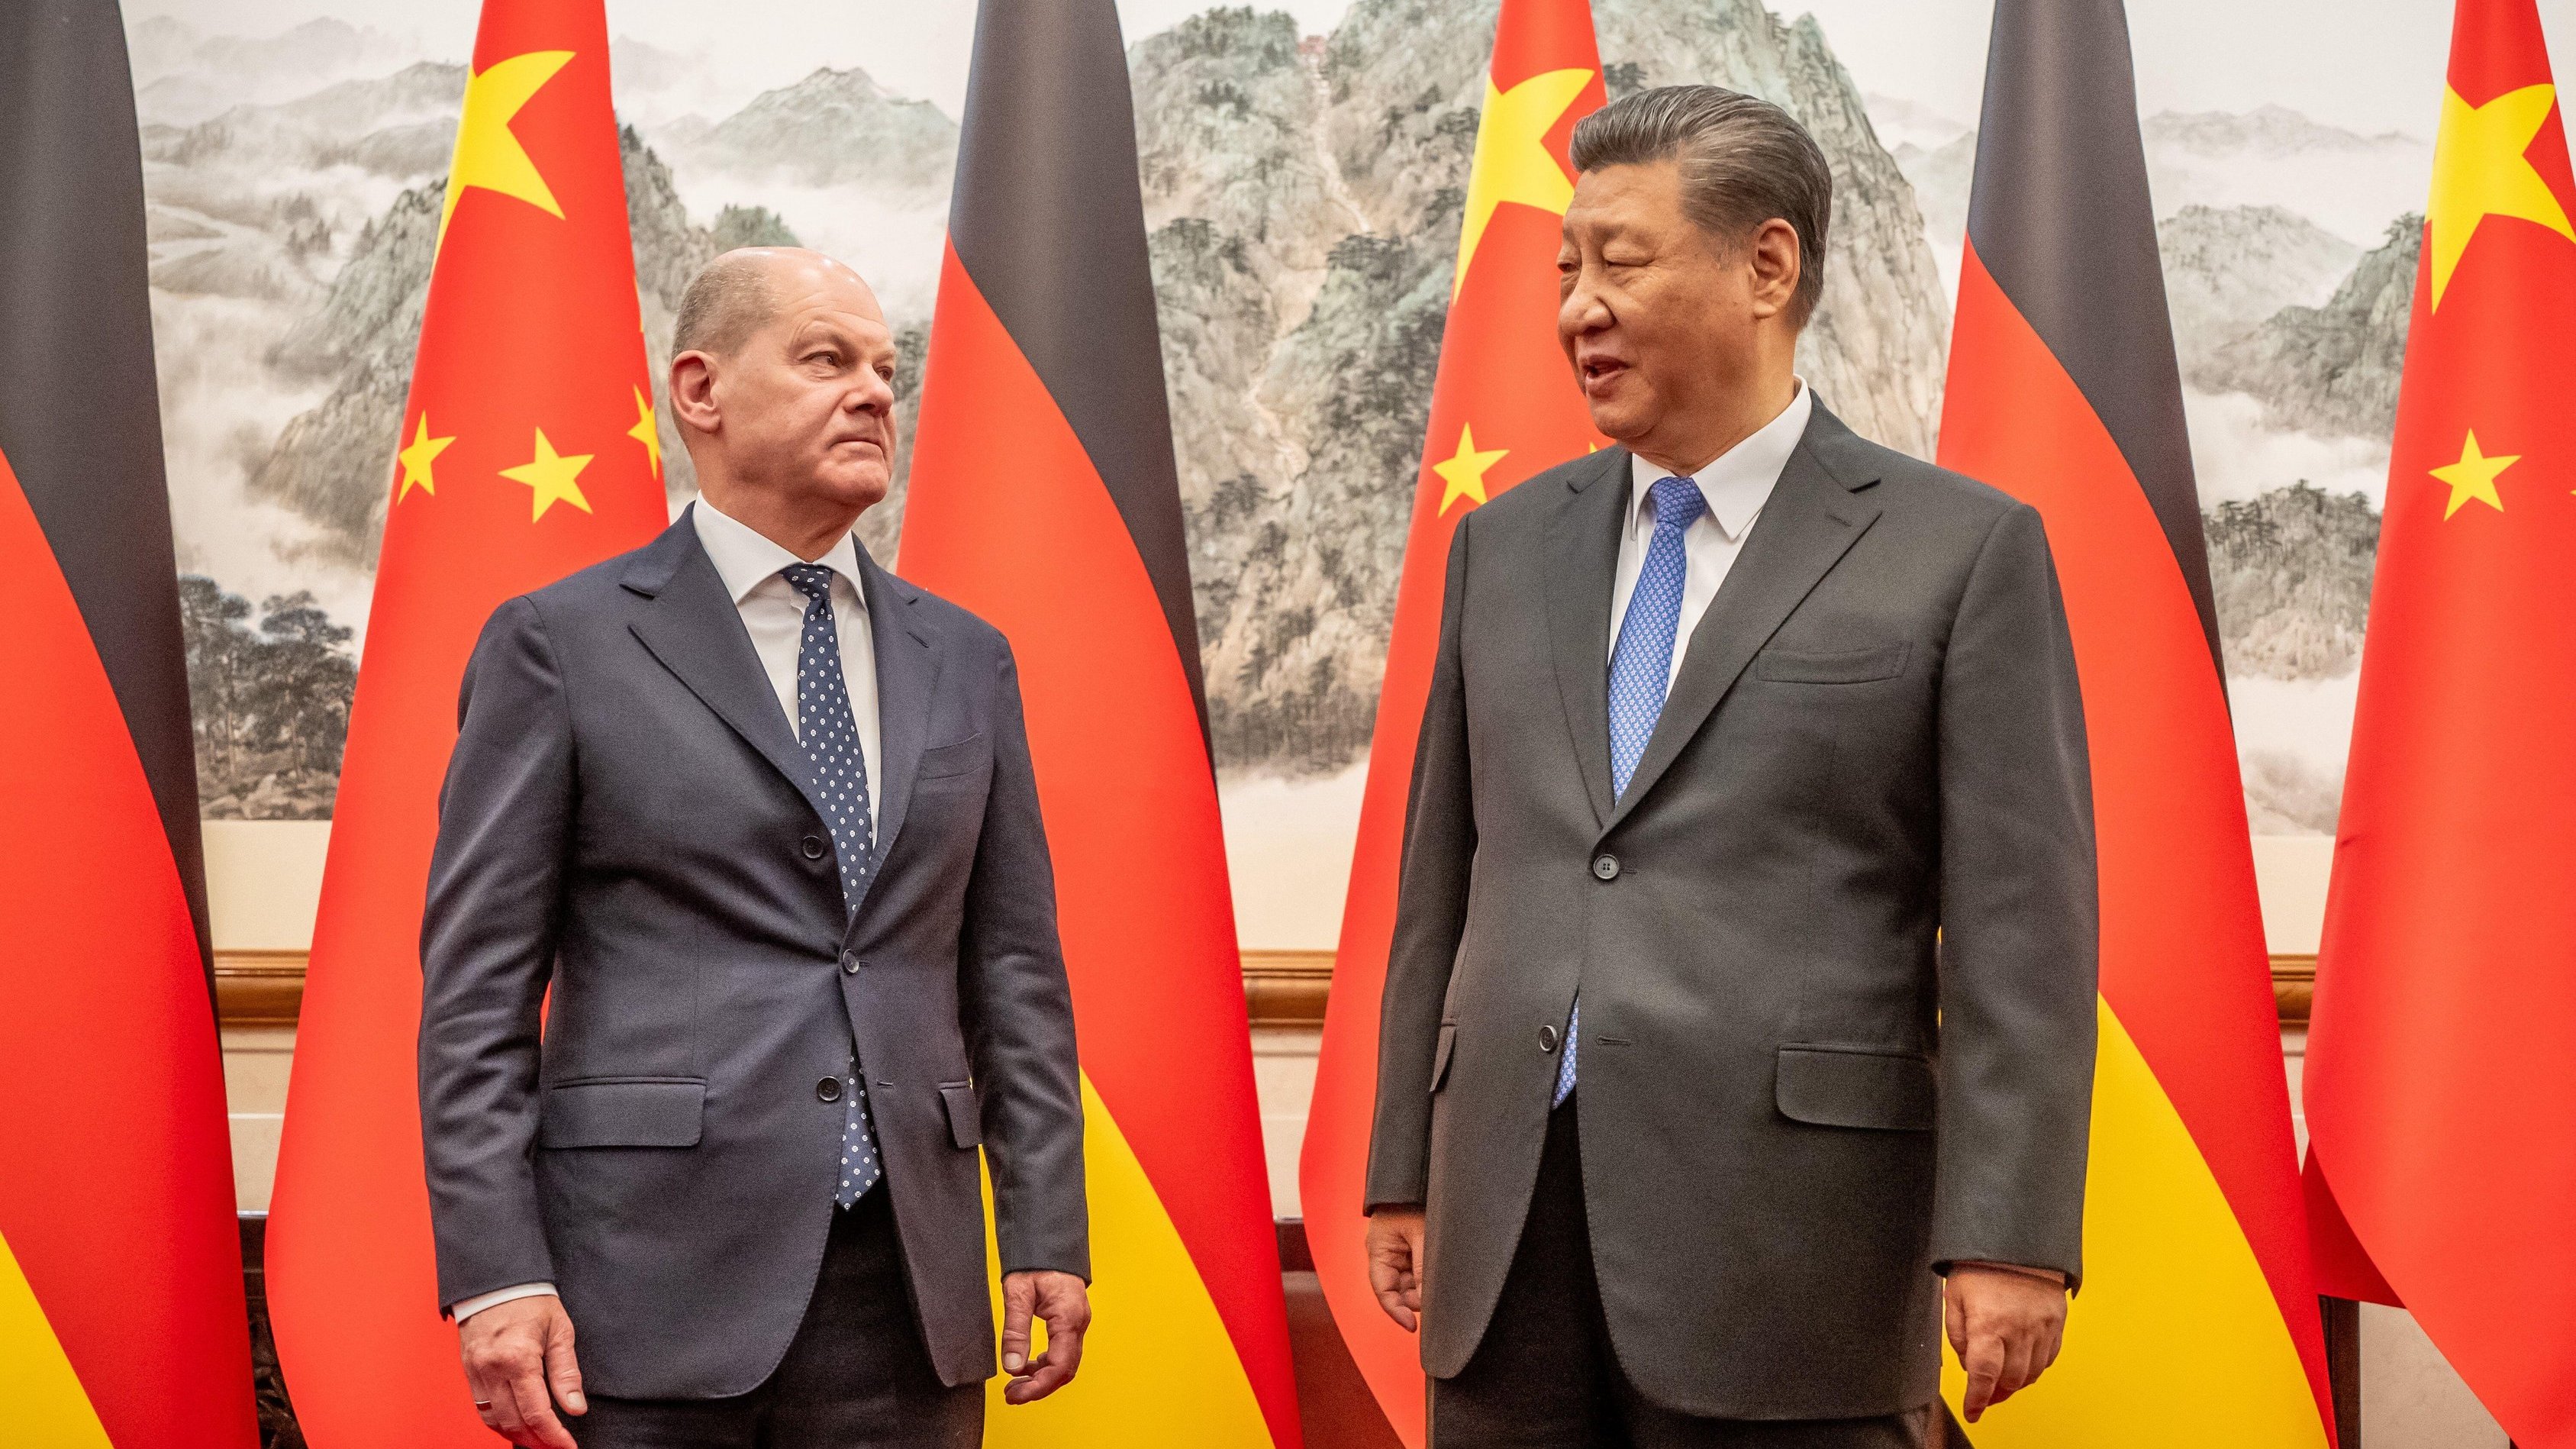 Olaf Scholz is received by President Xi Jinping during his trip China last week